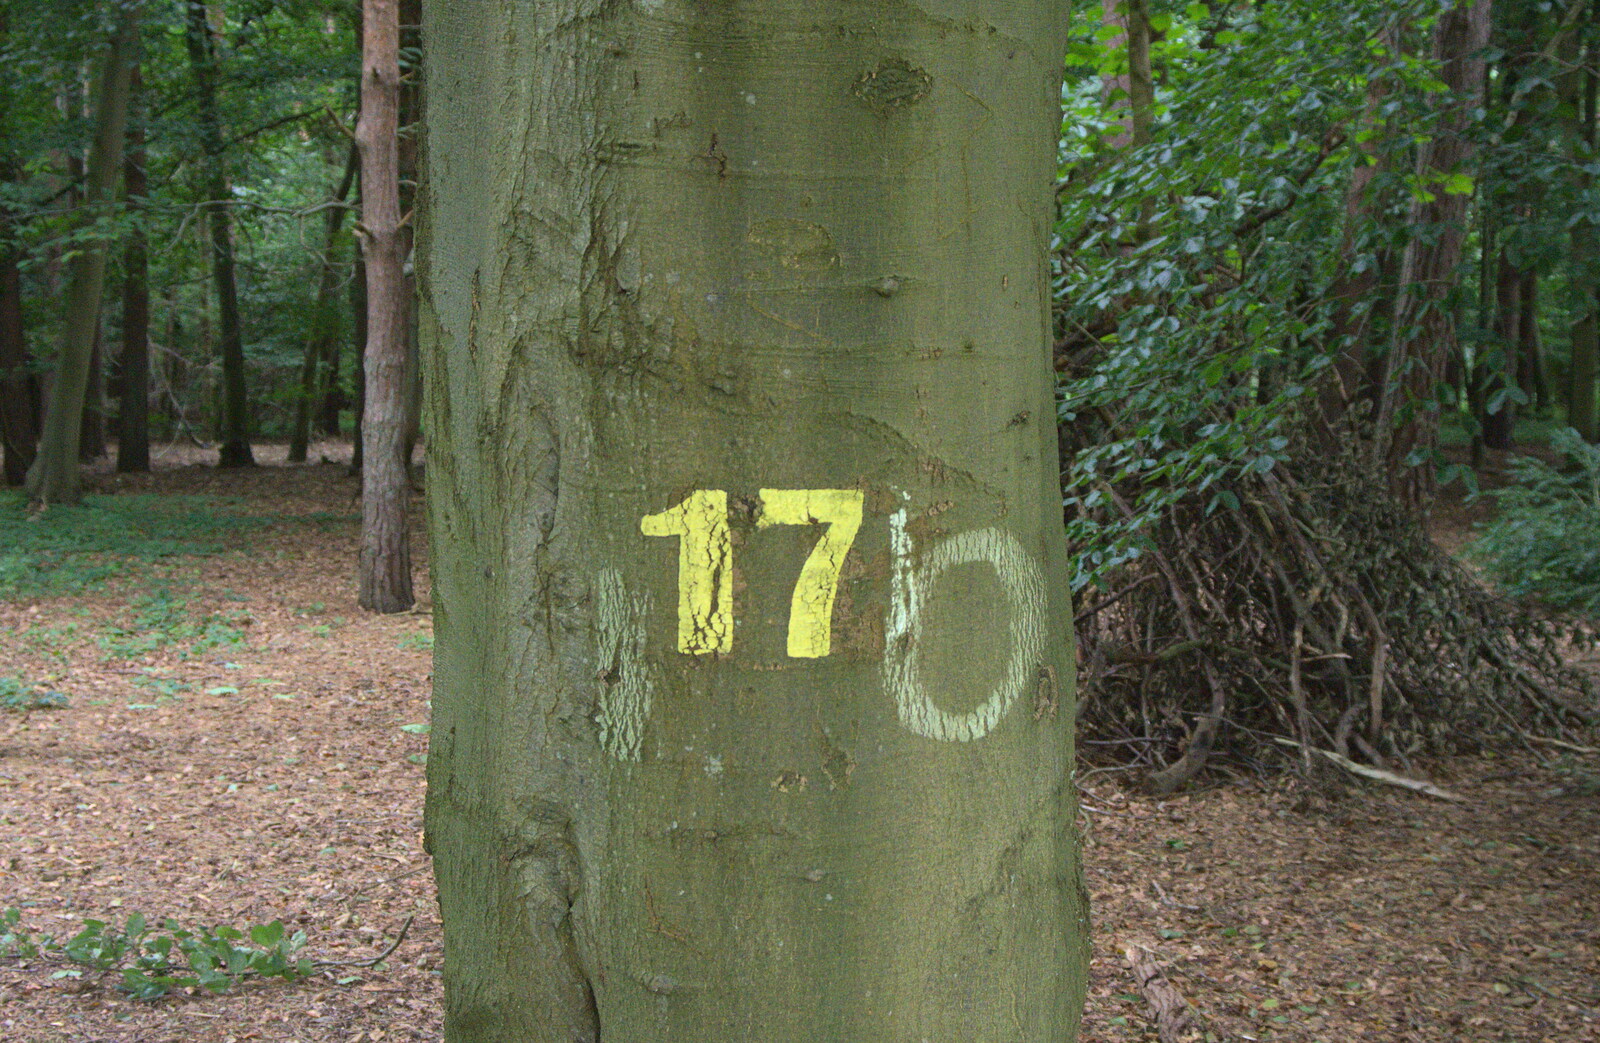 A tree marked as '17' from Camping at Dower House, West Harling, Norfolk - 1st September 2012